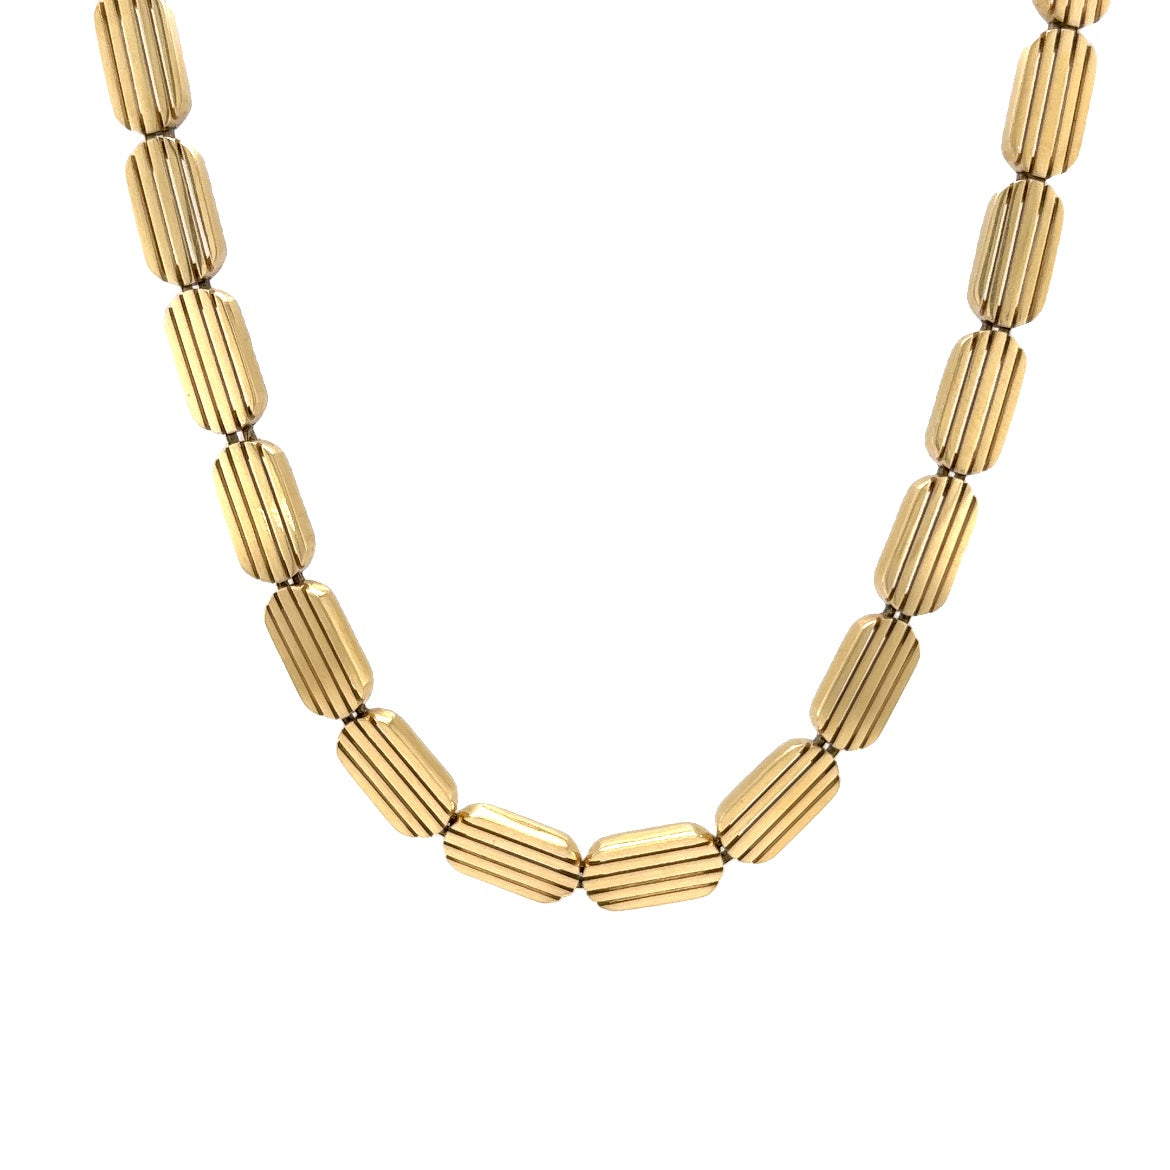 Mid-Century Decorative Chain Necklace in 14k Yellow GoldComposition: 14 Karat Yellow Gold Total Gram Weight: 21.5 g Inscription: 14k ITALY
      